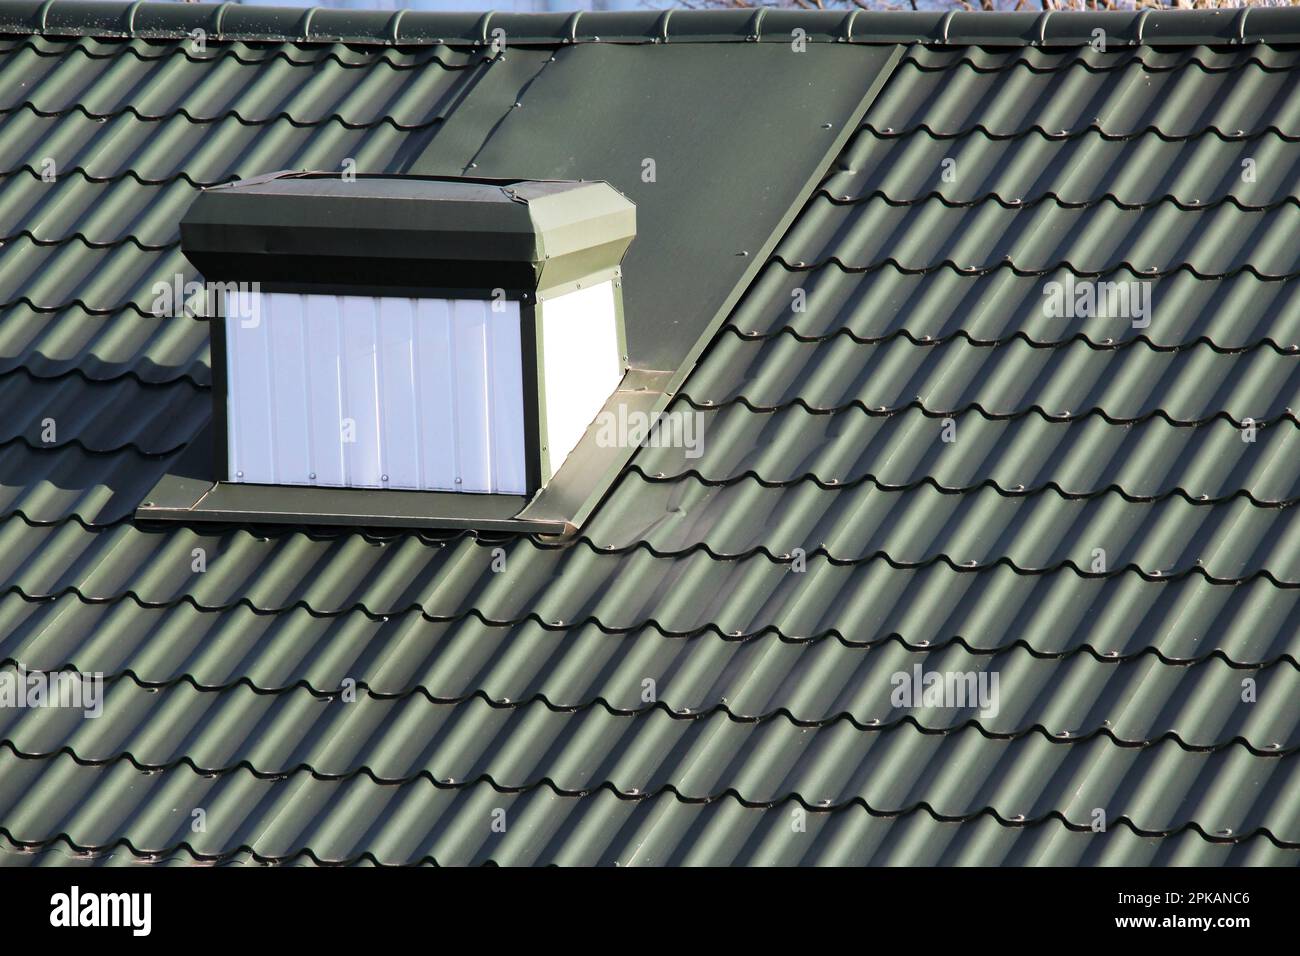 The house, the roof of which is covered with metal tiles Stock Photo